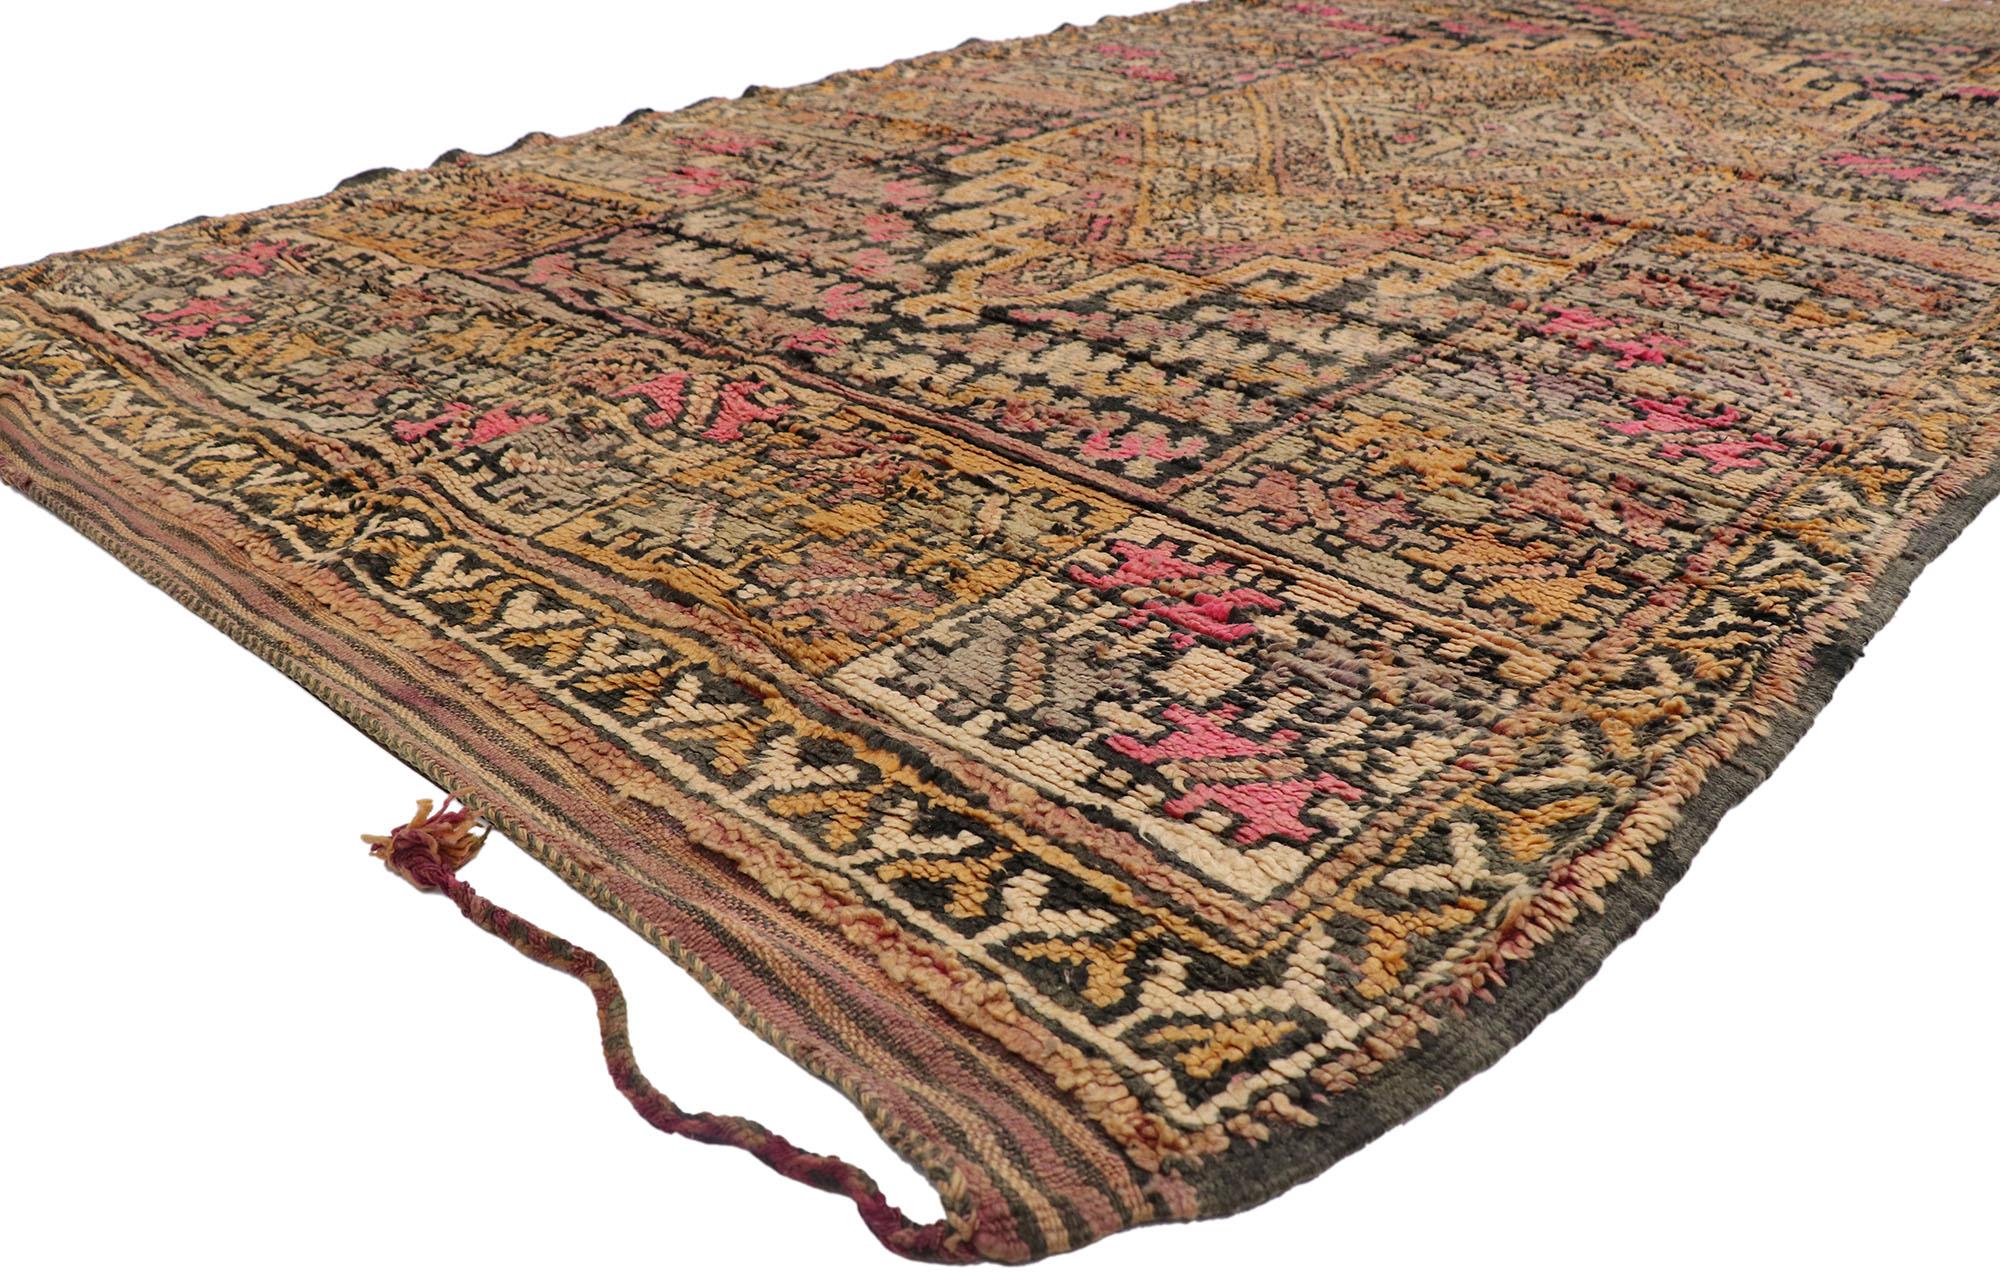 21490 vintage Berber Boujad Moroccan rug with Boho Tribal Style 06'11 x 13'02. Warm and inviting with tribal boho style, this hand-knotted wool vintage Berber Boujad Moroccan rug is a captivating vision of woven beauty. The abrashed charcoal colored